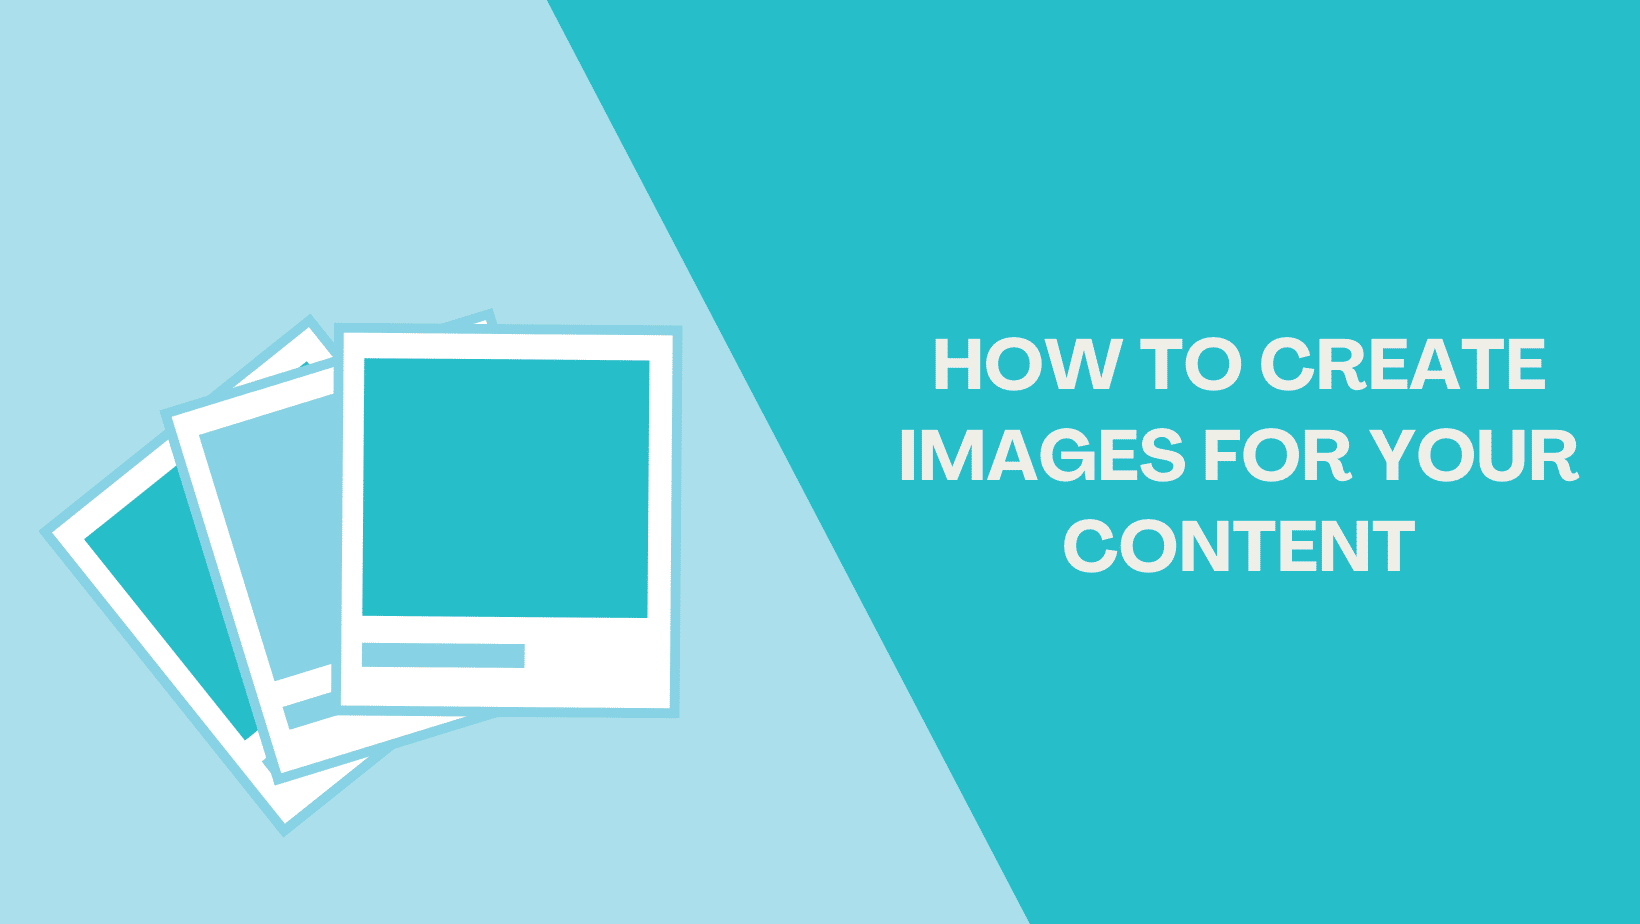 How to Create Images for Your Content